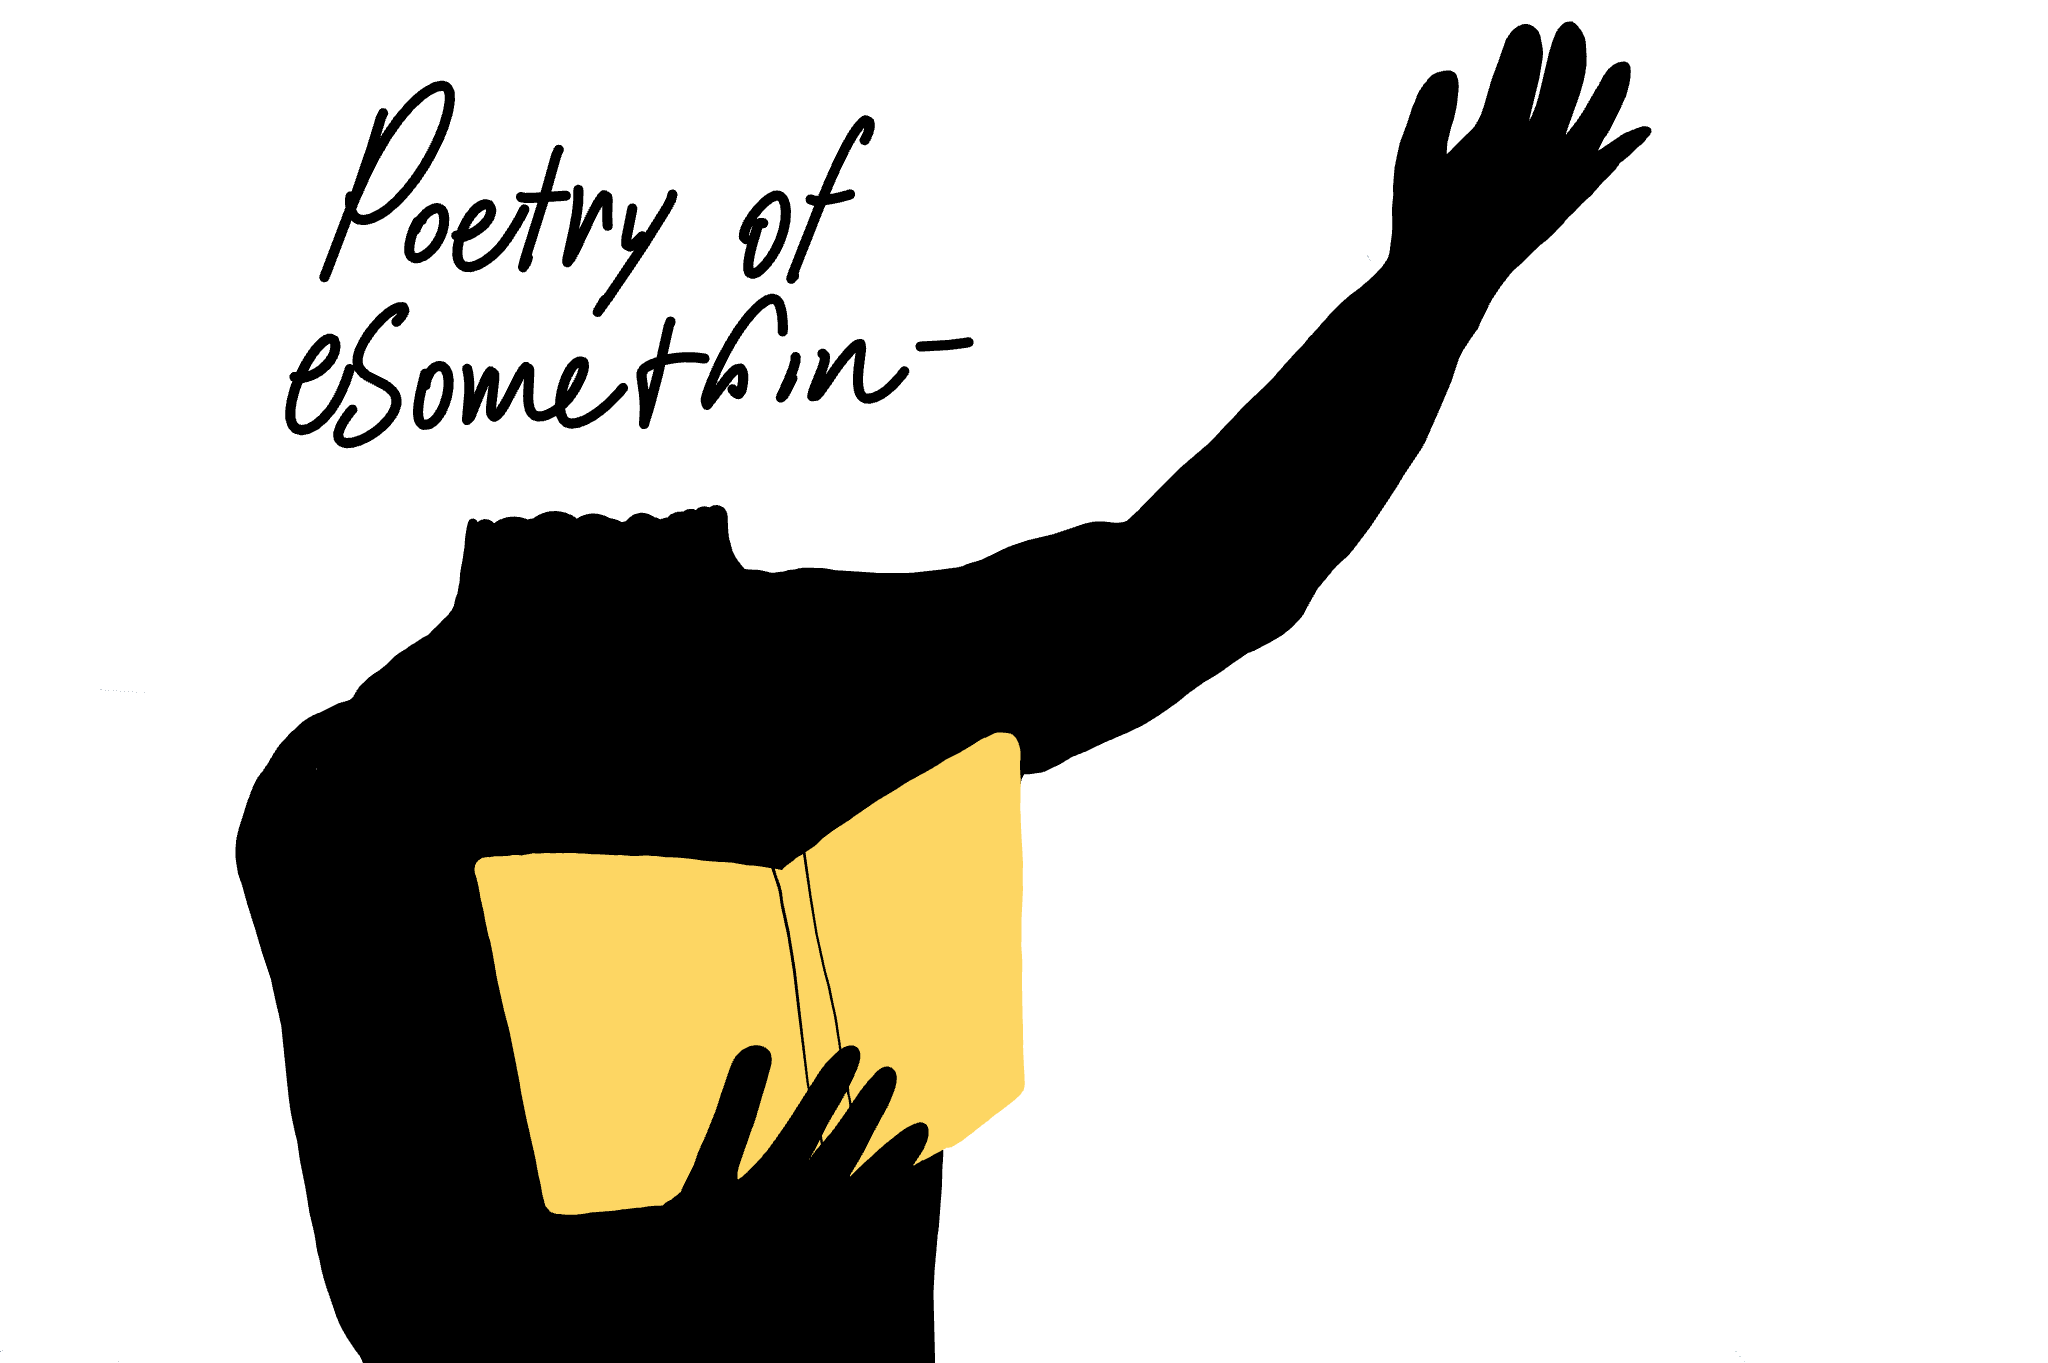 a silhouette holding a book that says, "poetry of esomethin" above it